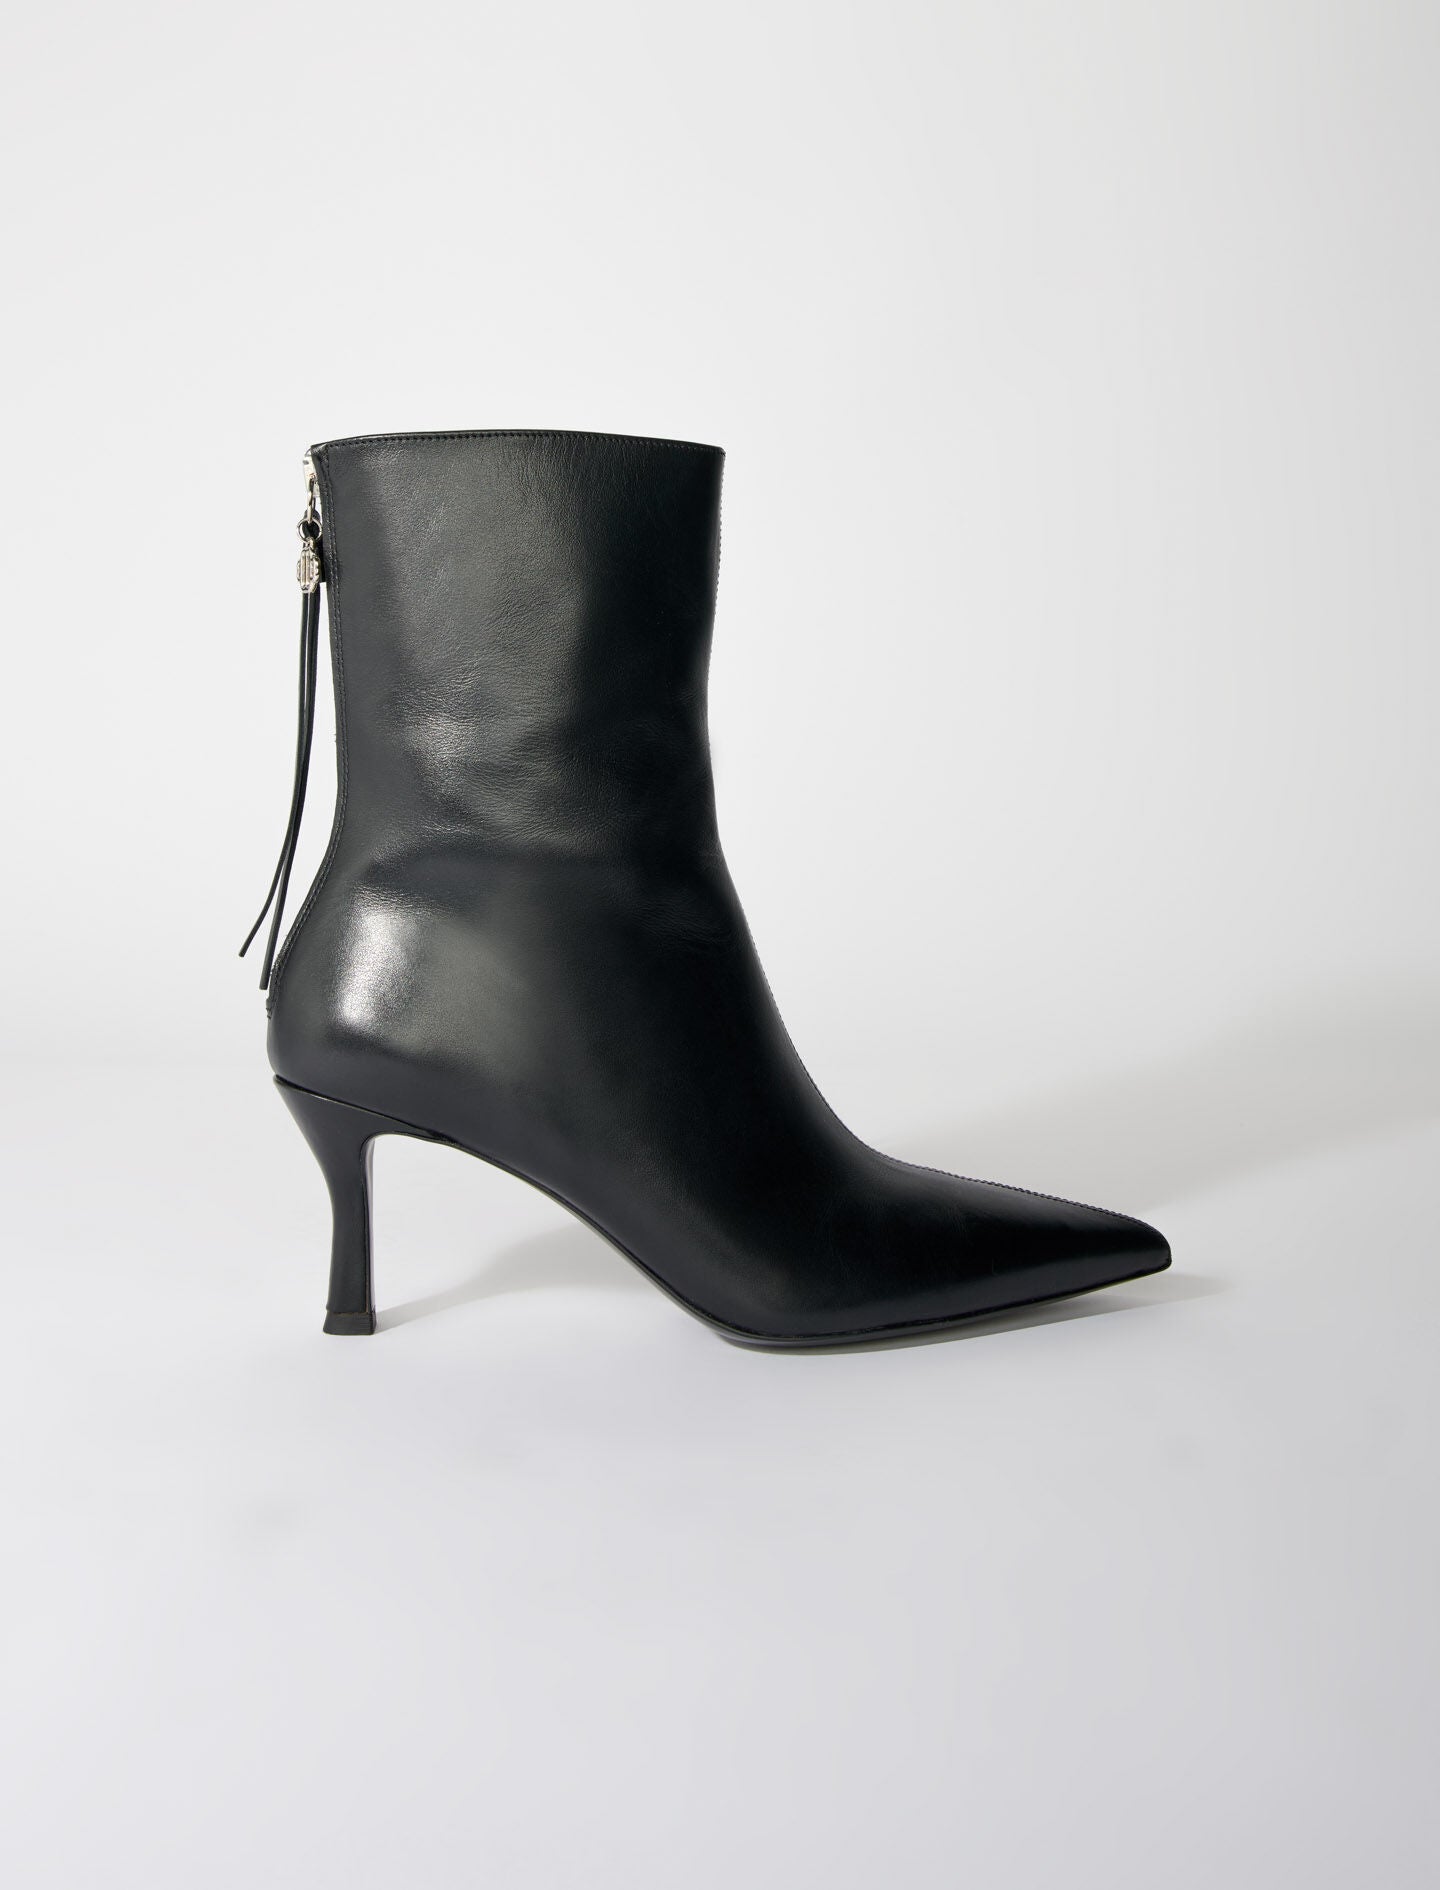 Black-leather ankle boots